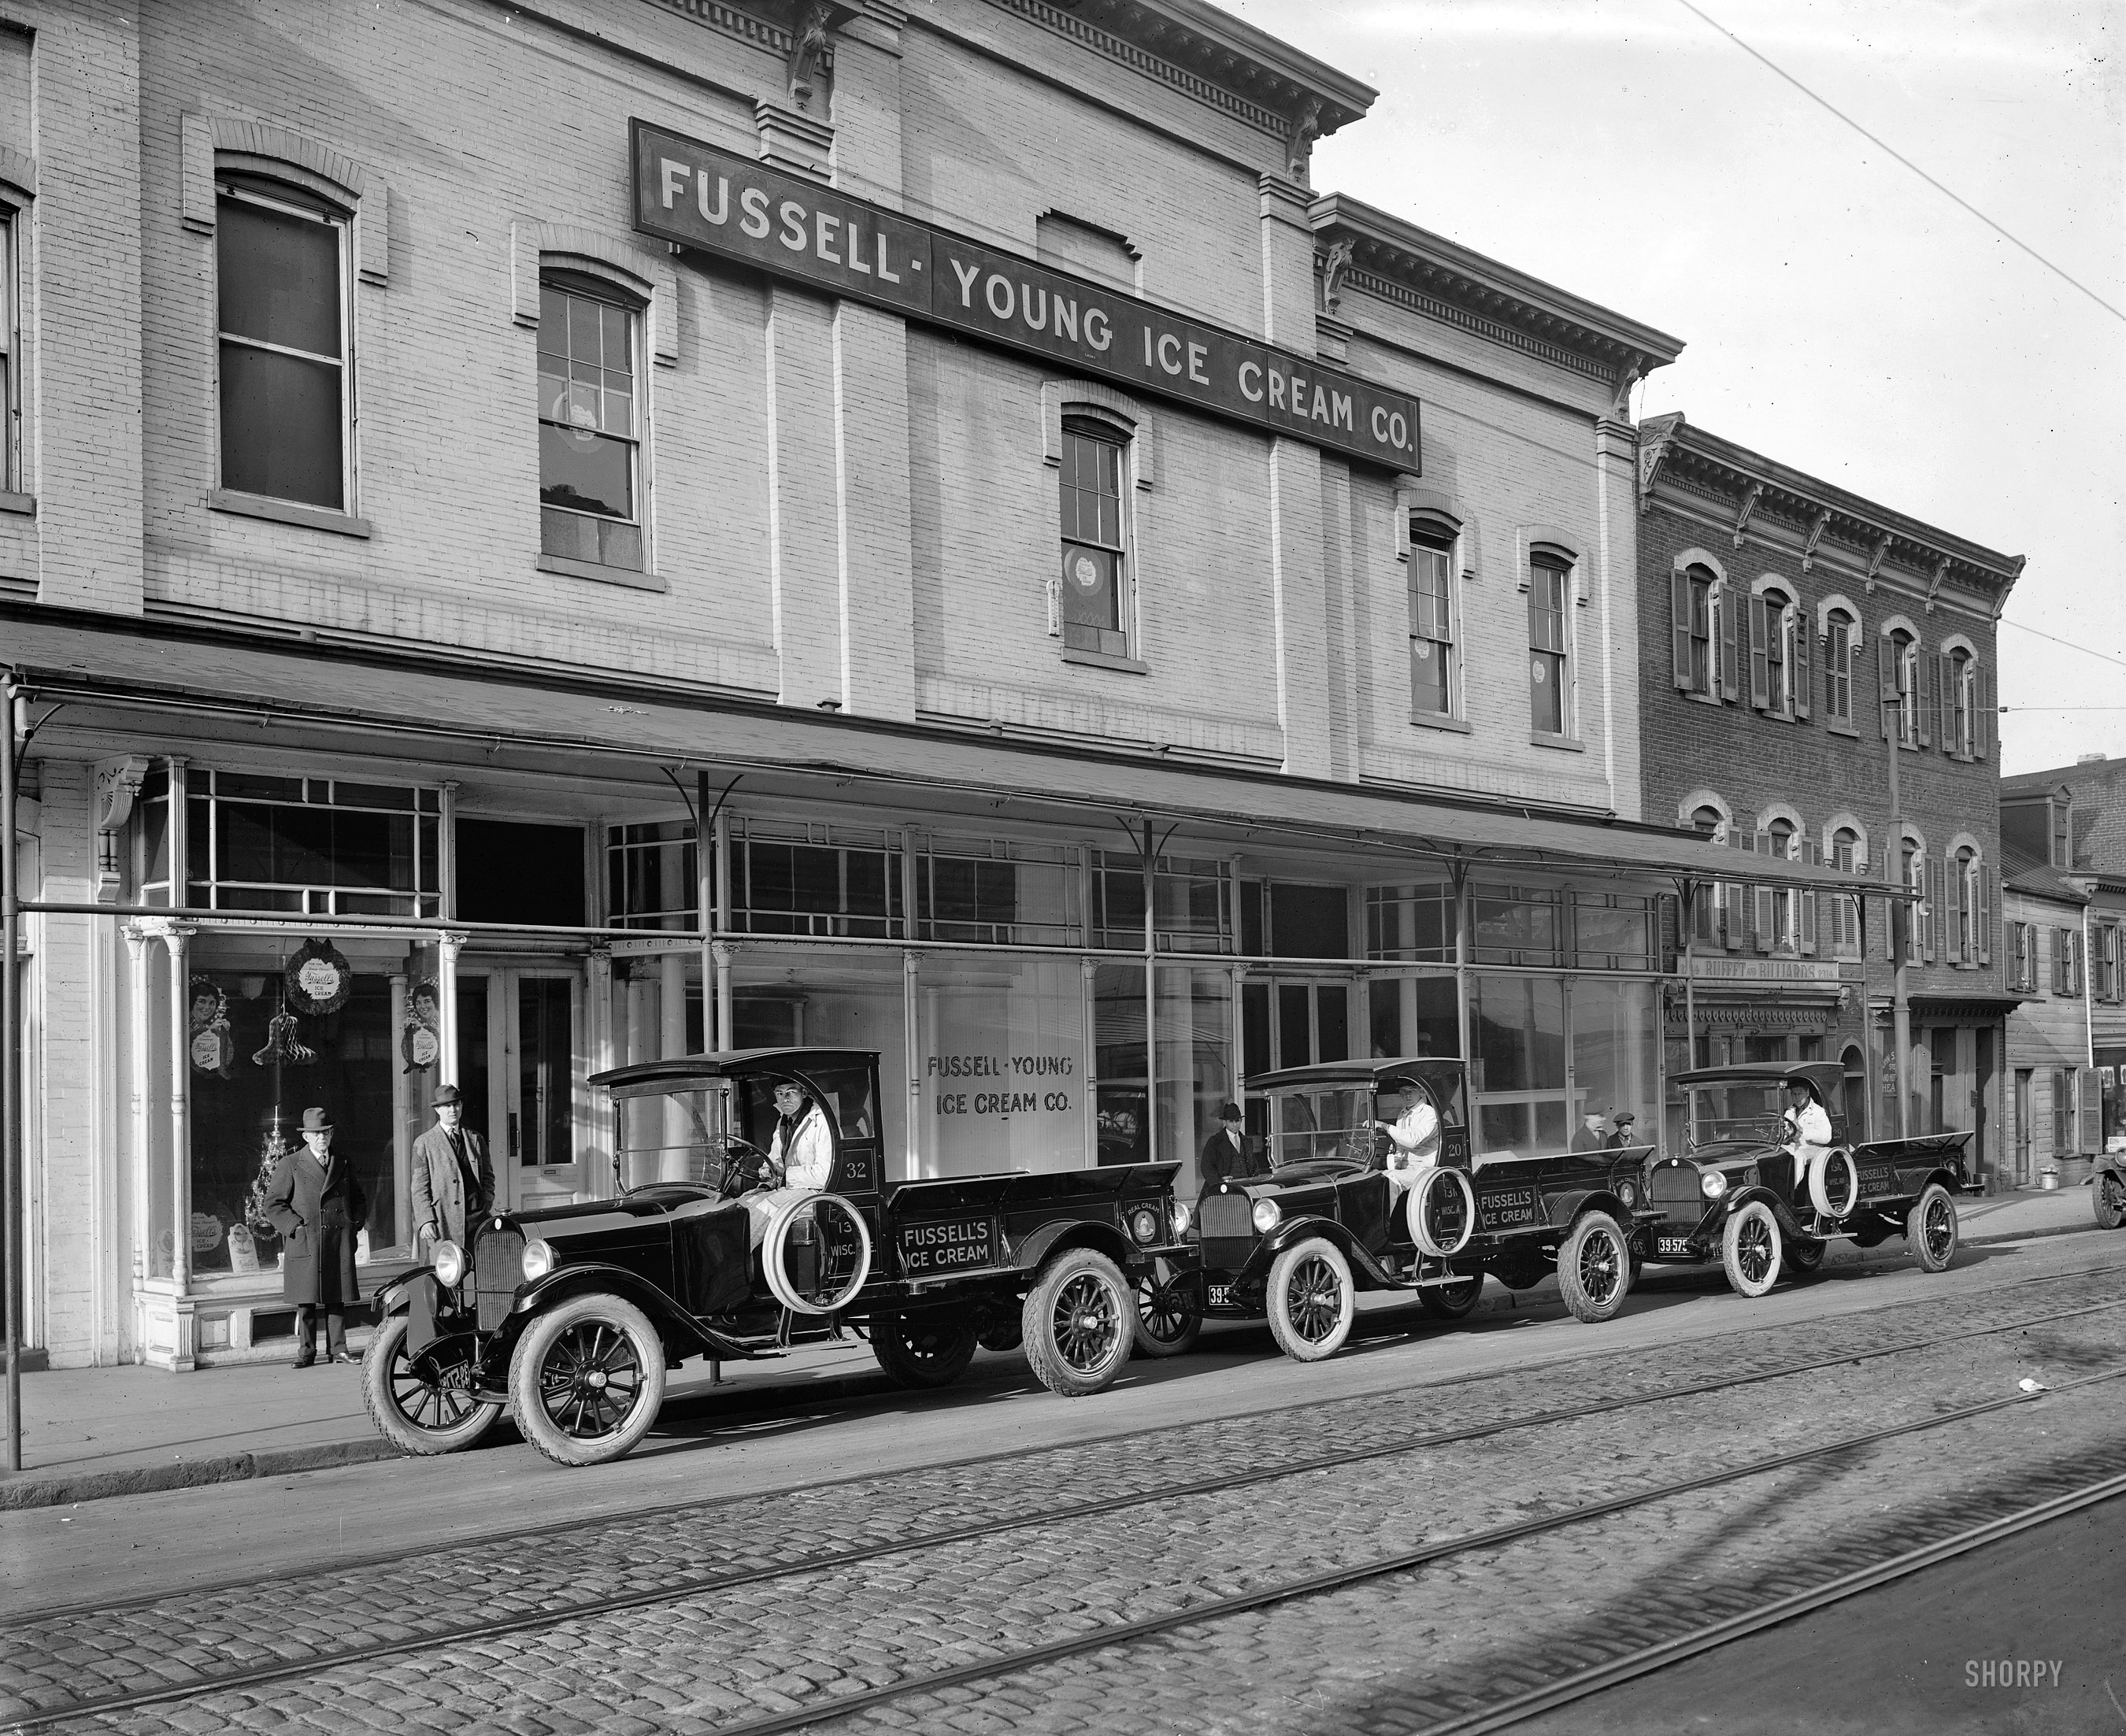 Washington, D.C., circa 1923. "Fussell-Young Ice Cream Co. trucks." I scream, you scream, etc. National Photo Co. Collection glass negative. View full size.